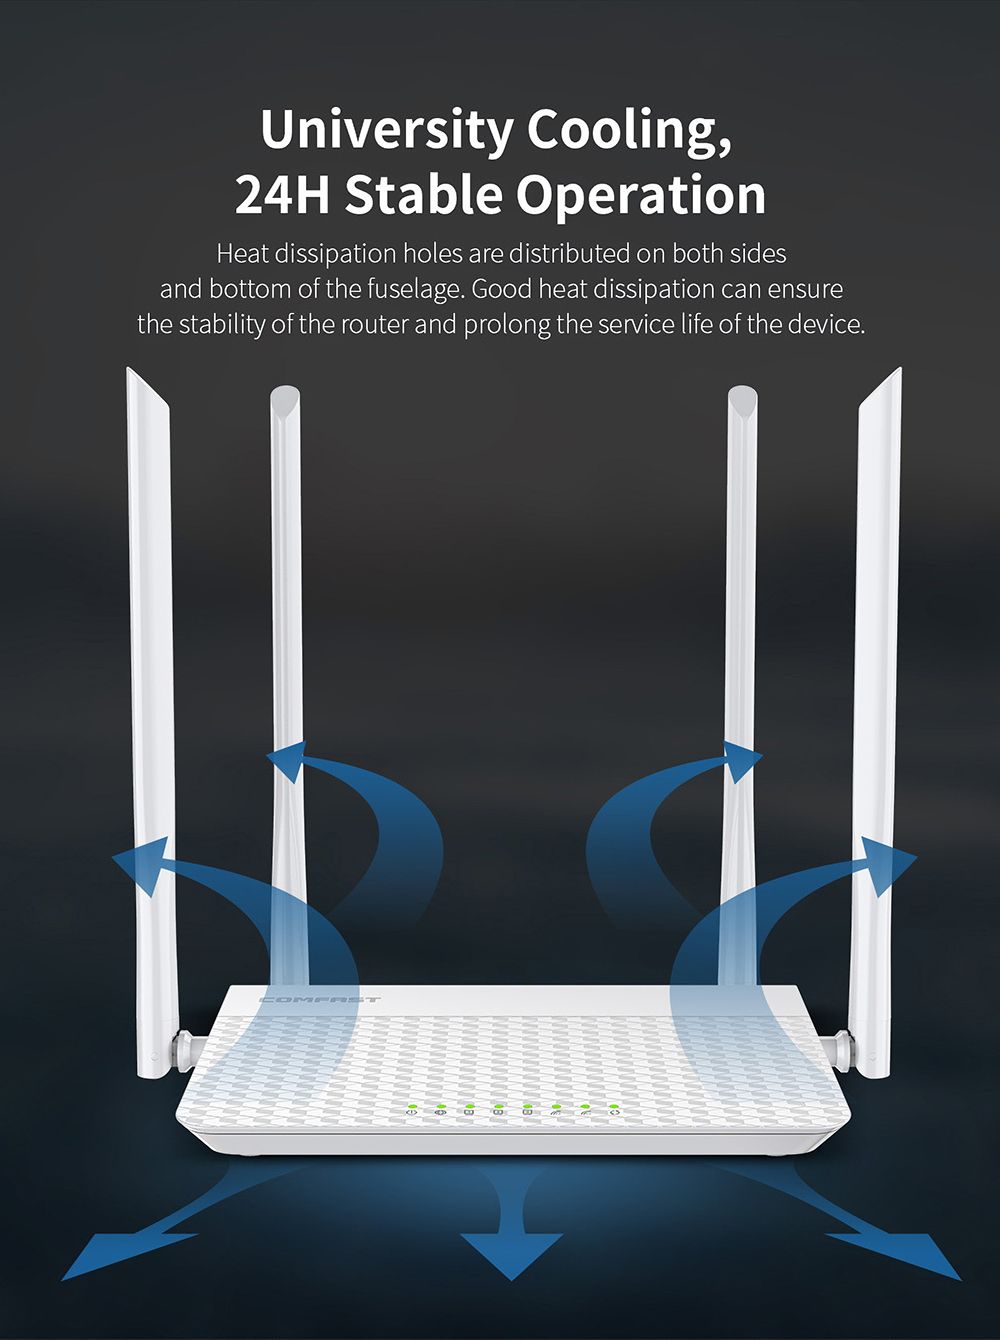 COMFAST-CF-N3-V3-Wireless-WiFi-Router-Mobile-Router-4Port-1200Mbps-Wireless-Signal-Booster-Gigabit-E-1735530